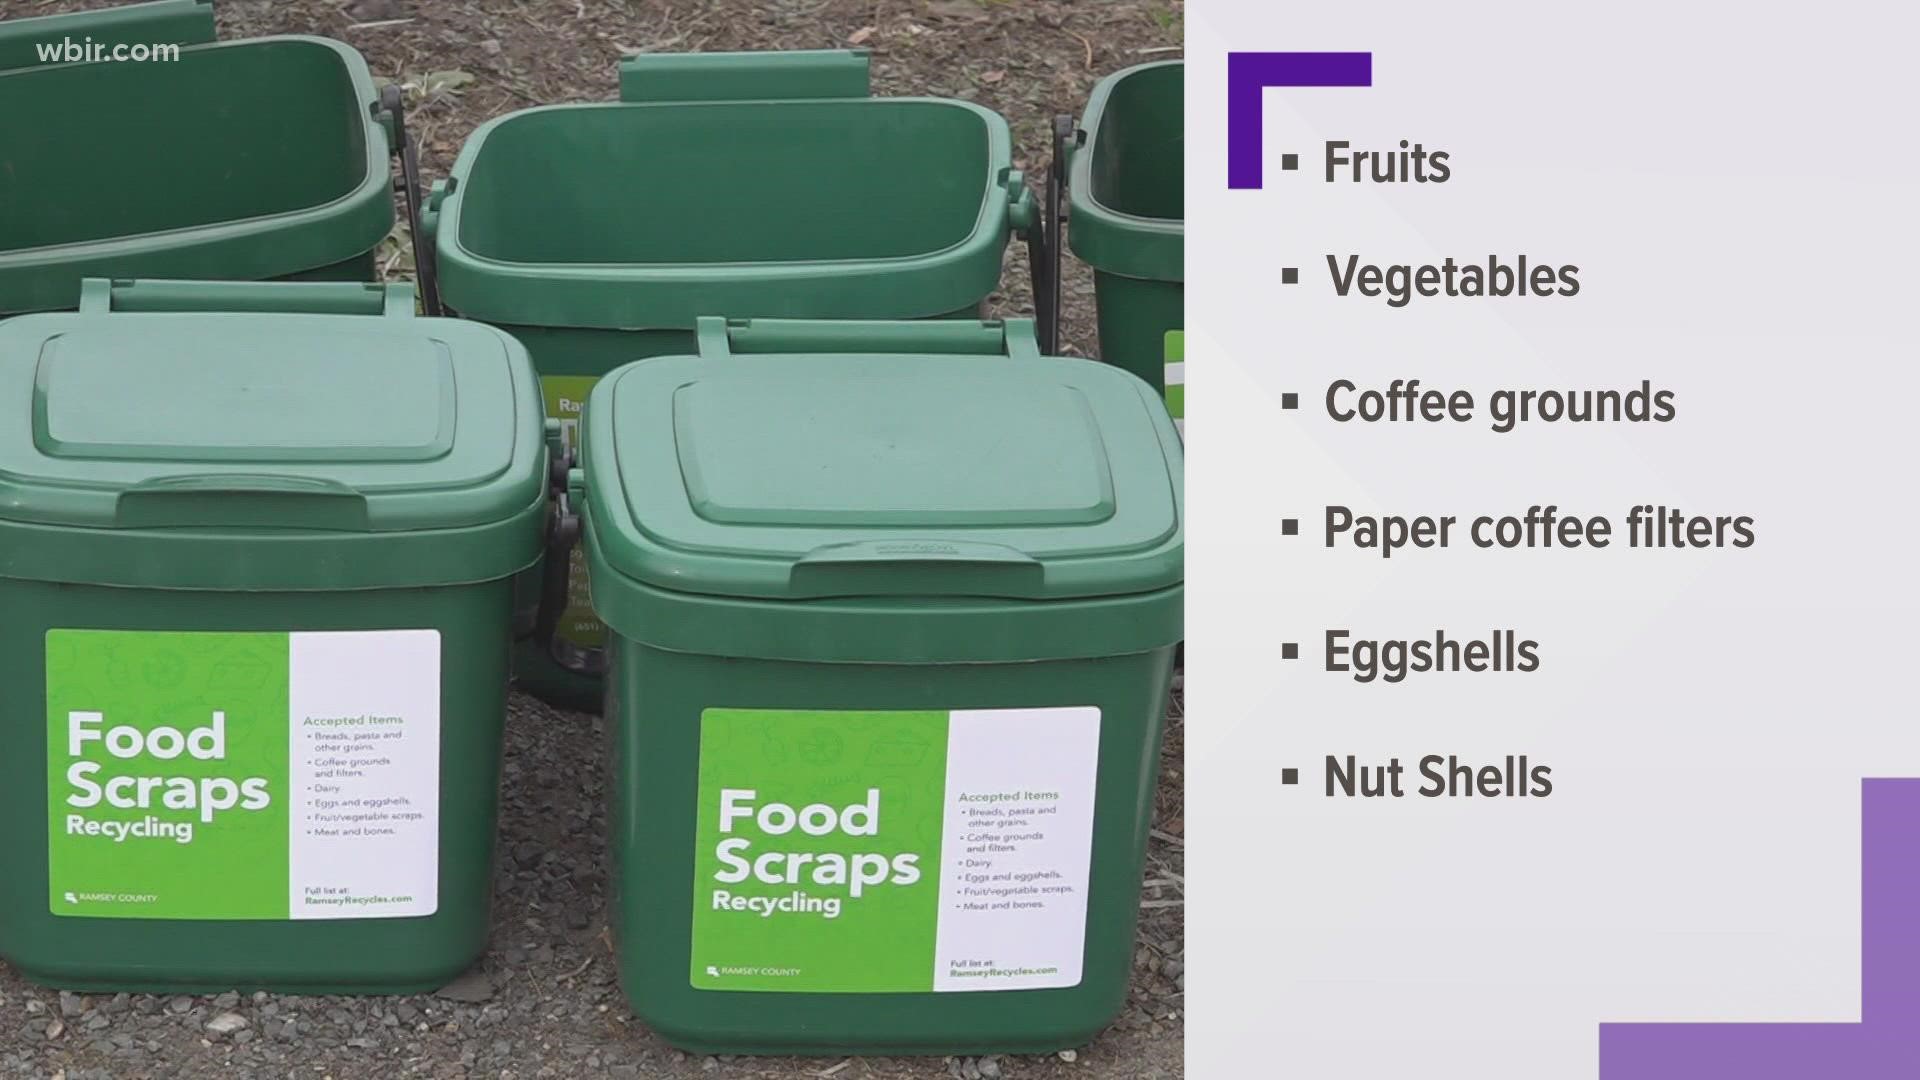 Acceptable items for composting include fruits, vegetables, coffee grounds, paper coffee filters, eggshells and nut shells.